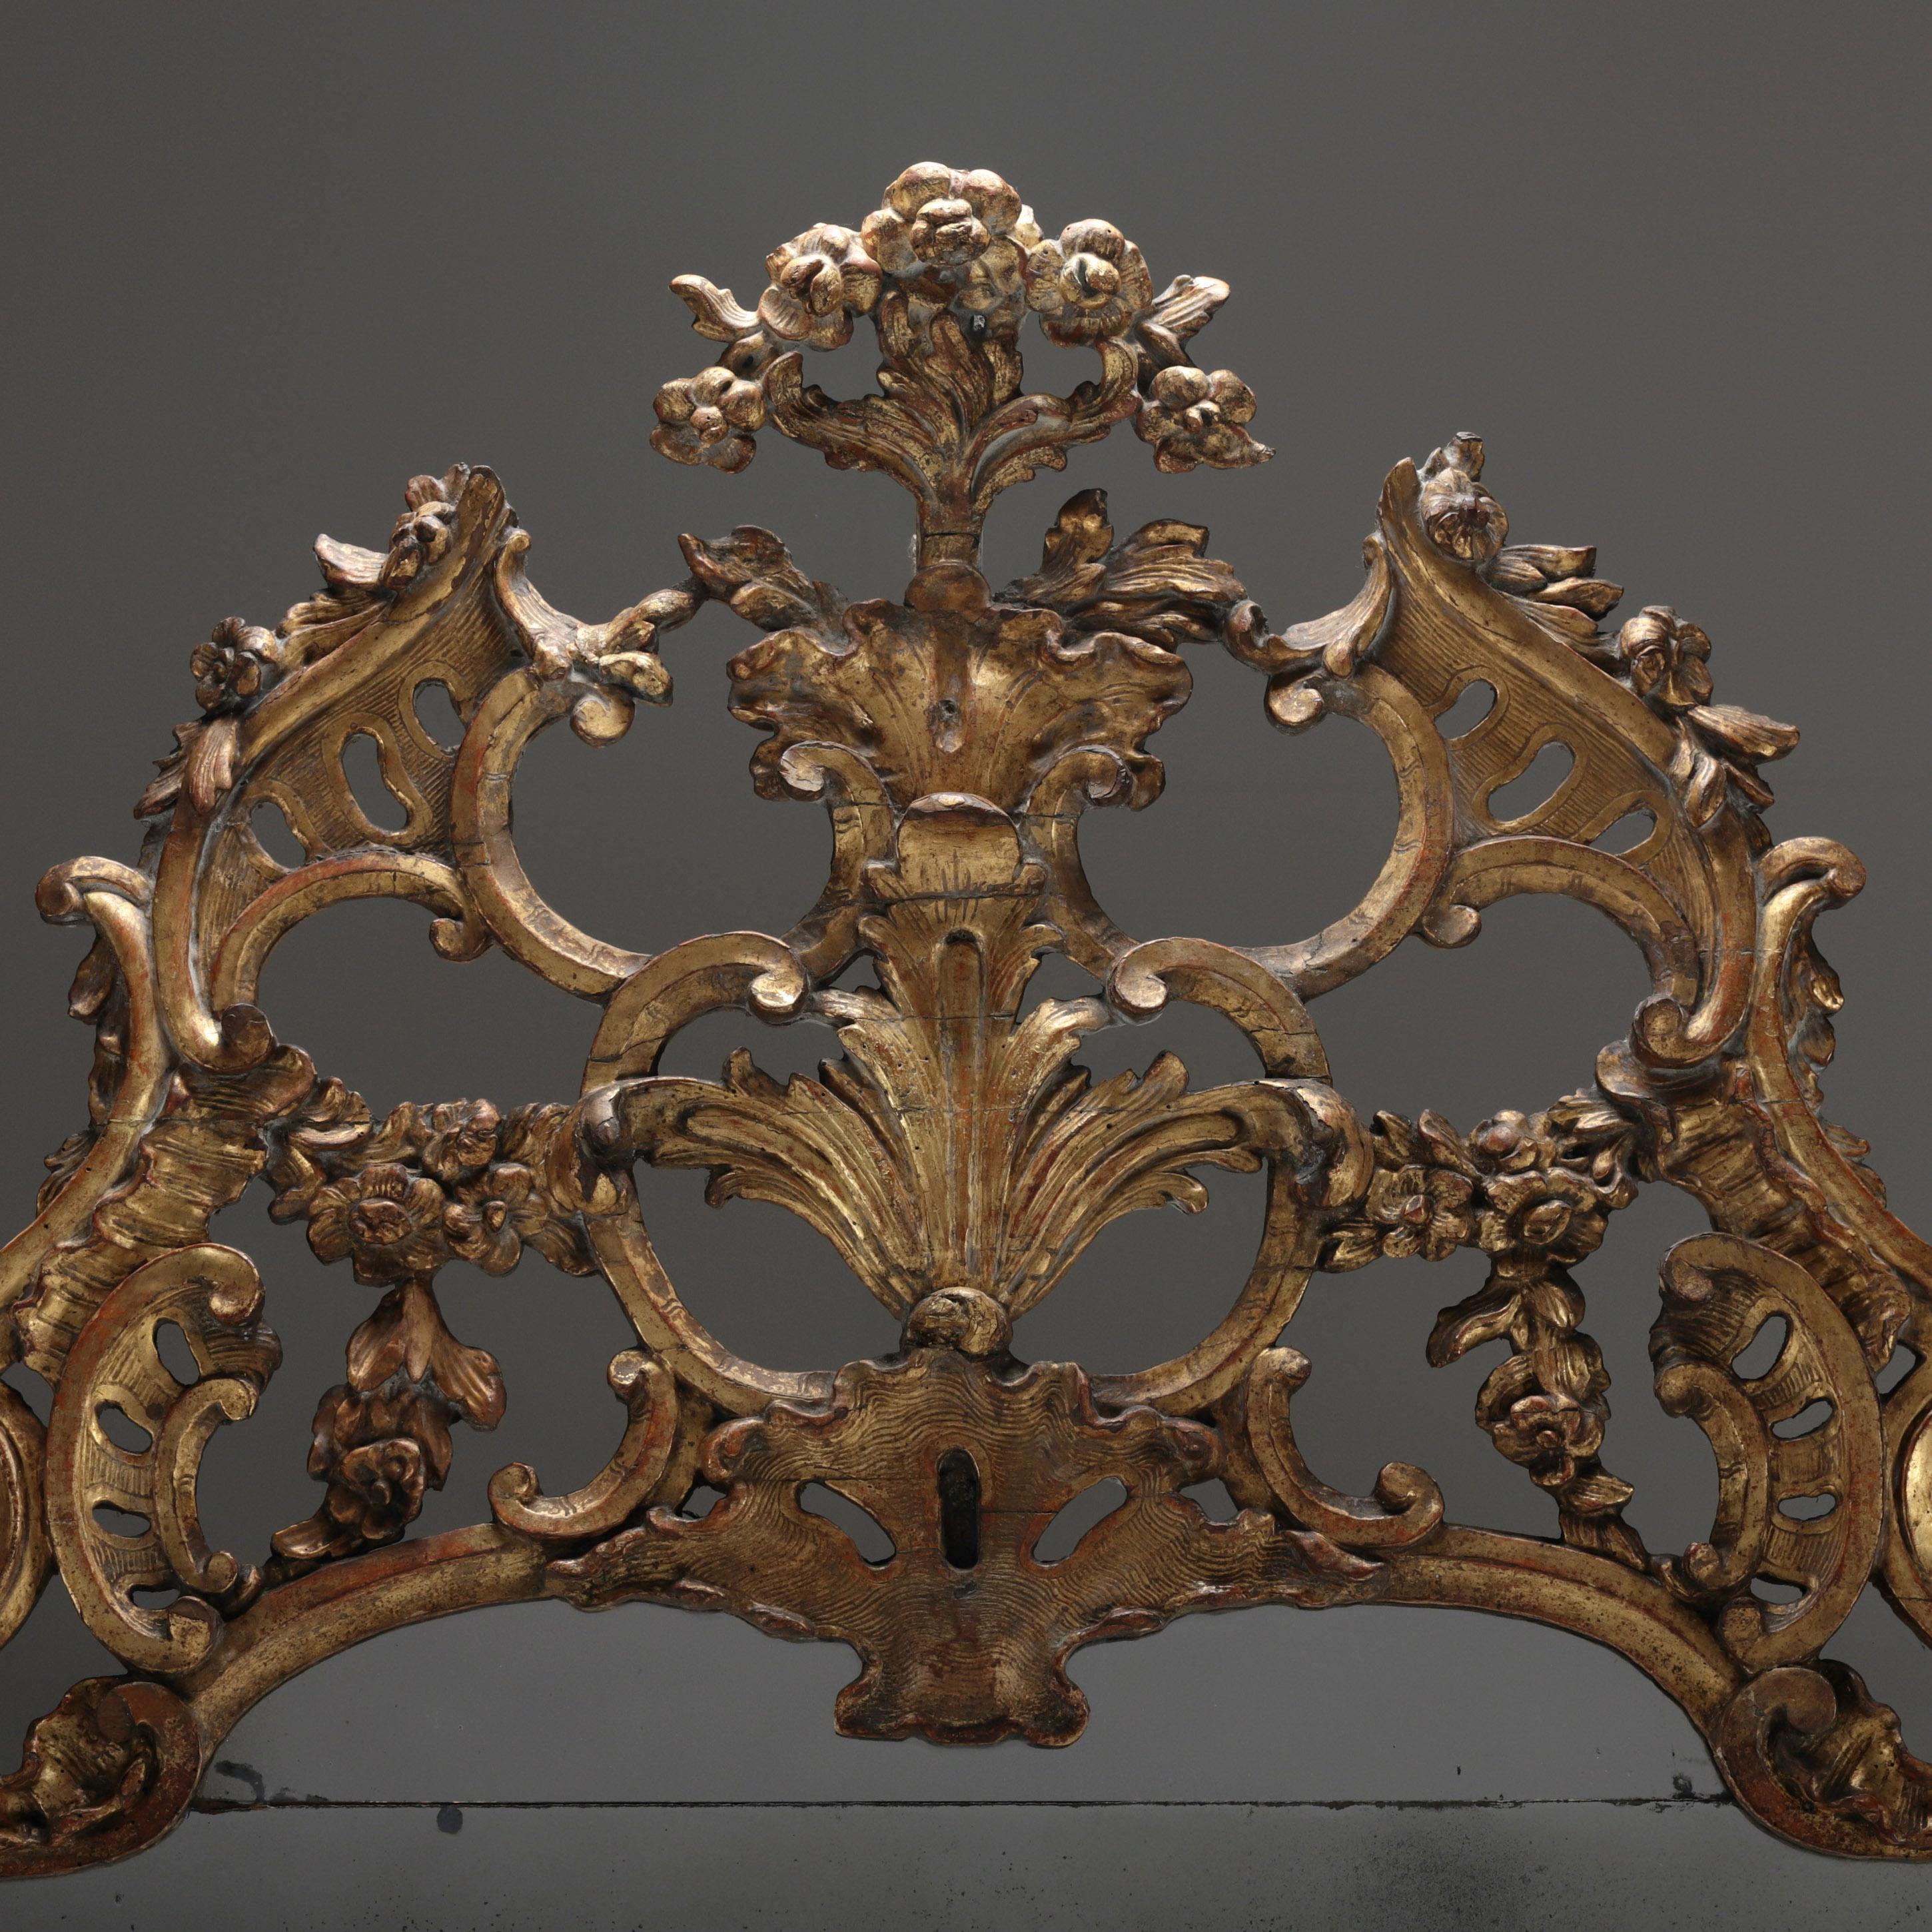 A NORTH ITALIAN OVERMANTEL MIRROR, CIRCA 1770
Of conventional rectangular landscape form with original mercury silvered plates, separated by gilt wood borders with beaded detail finished with a dramatic rococo style crest.
Height: 134cm
Width: